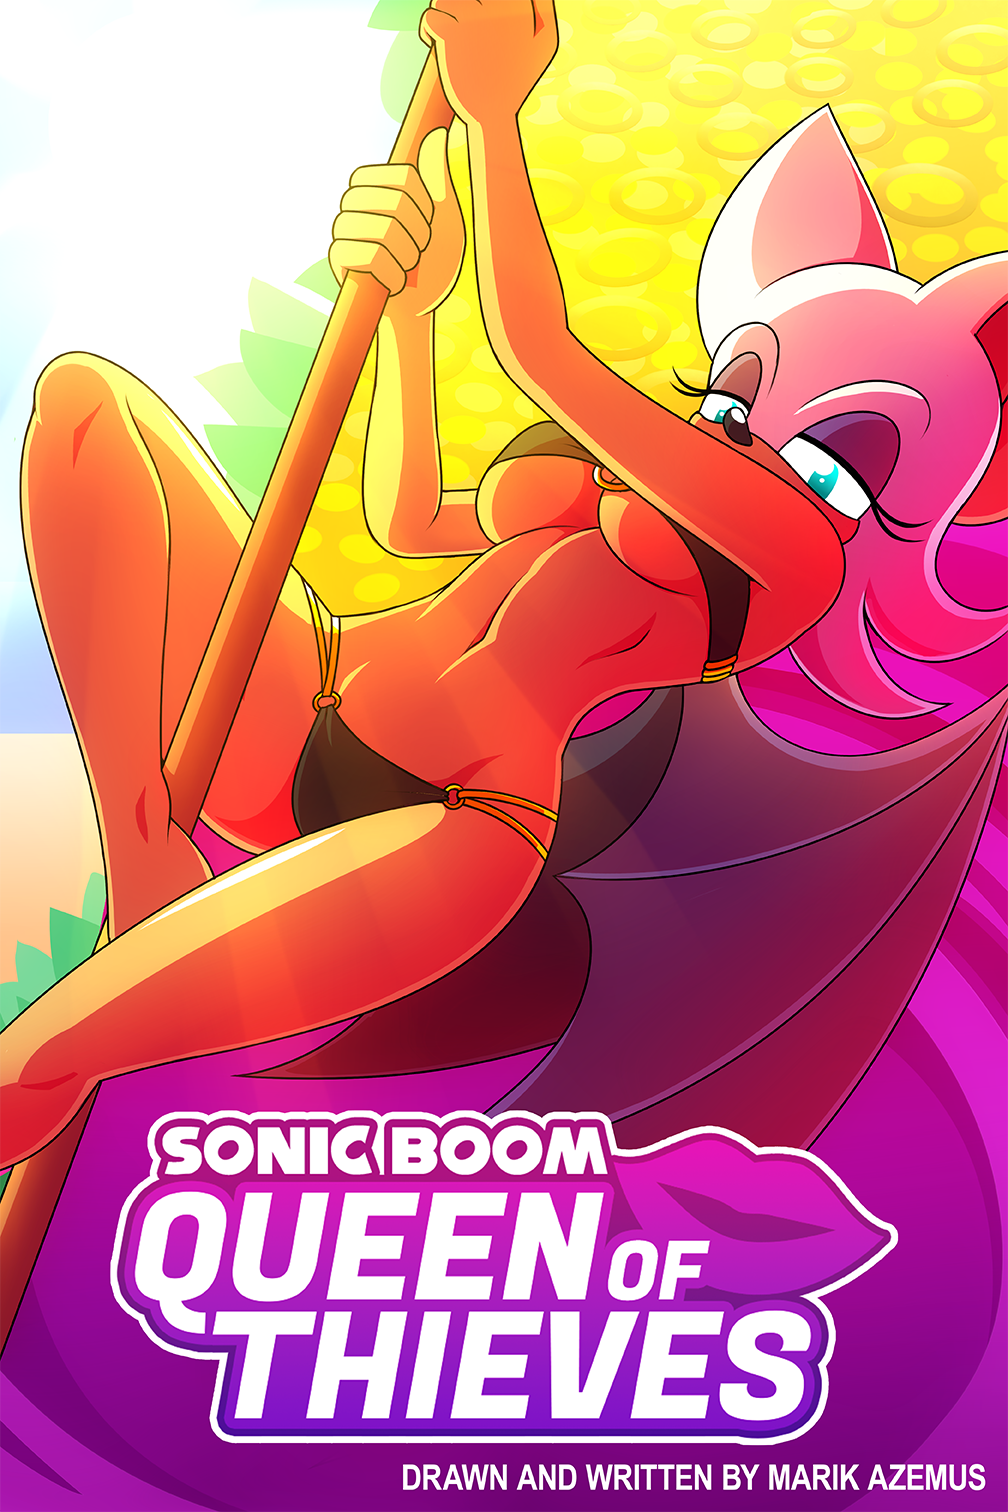 Sonic Boom Queen of Thieves by Marik Azemus Porn Comic